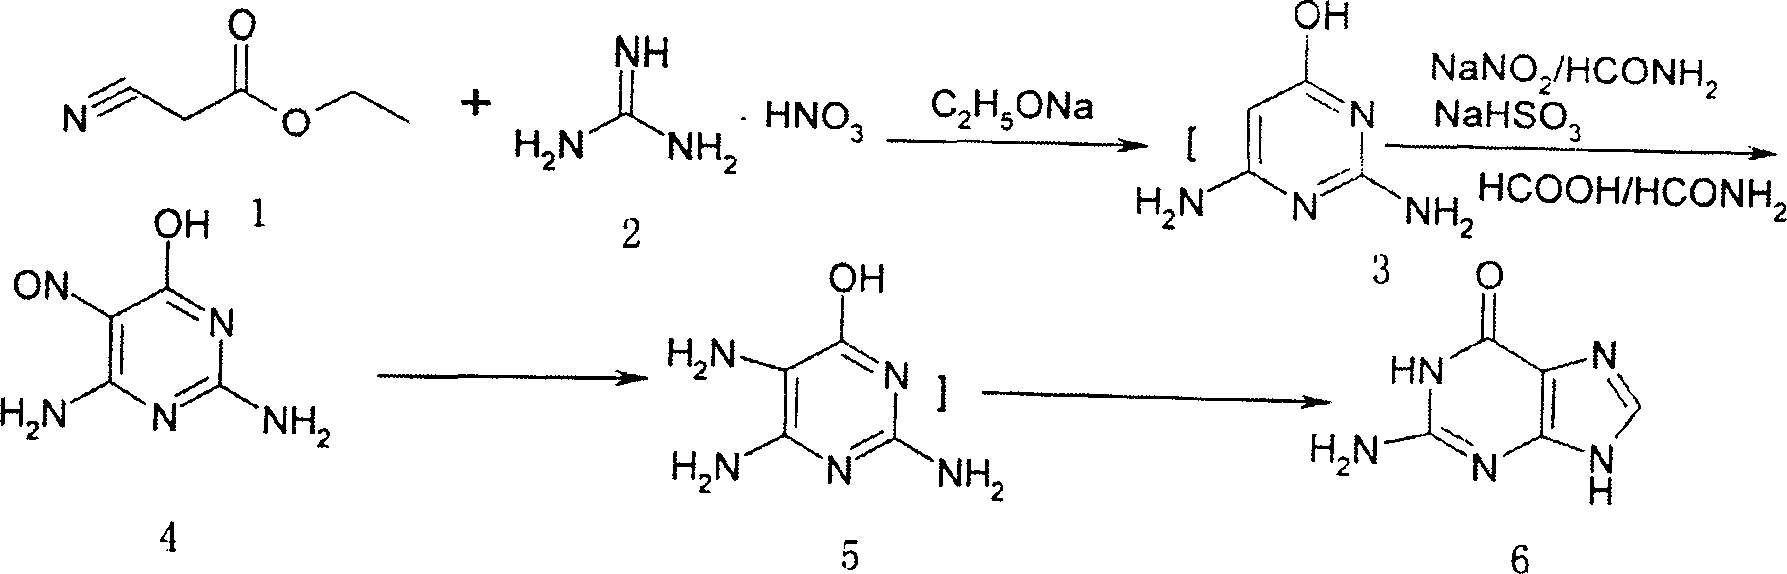 Guanine one-pot synthesis method